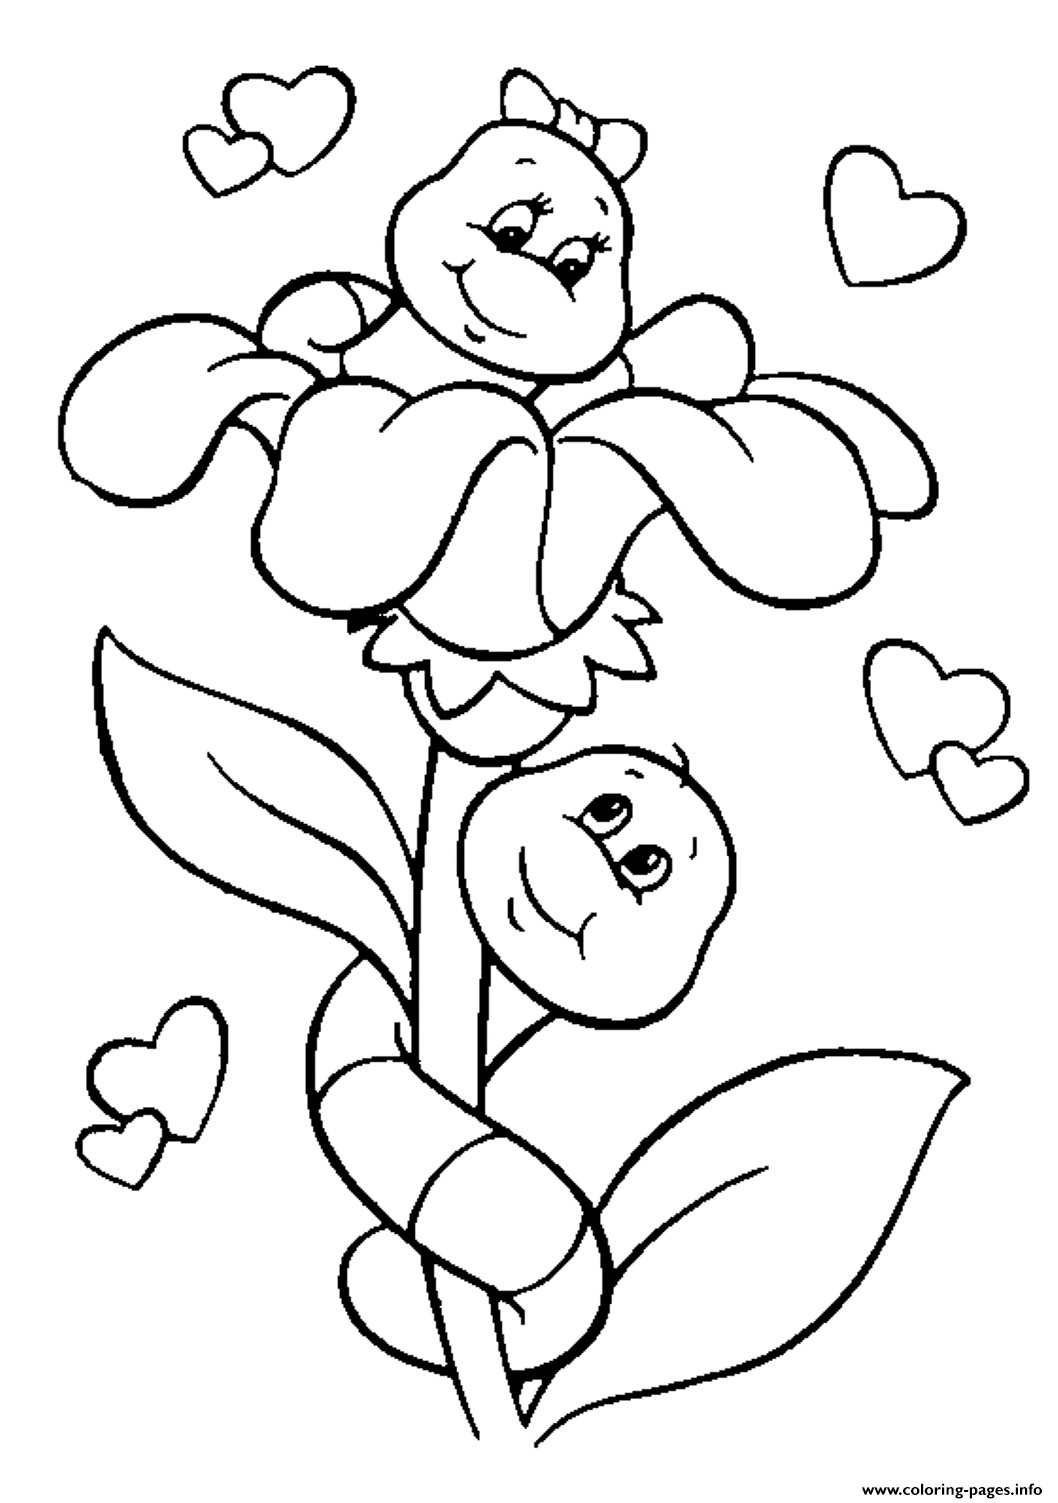 Valentines Coloring Pages For Girls
 Flower And Caterpillar In Love Valentine S9195 Coloring